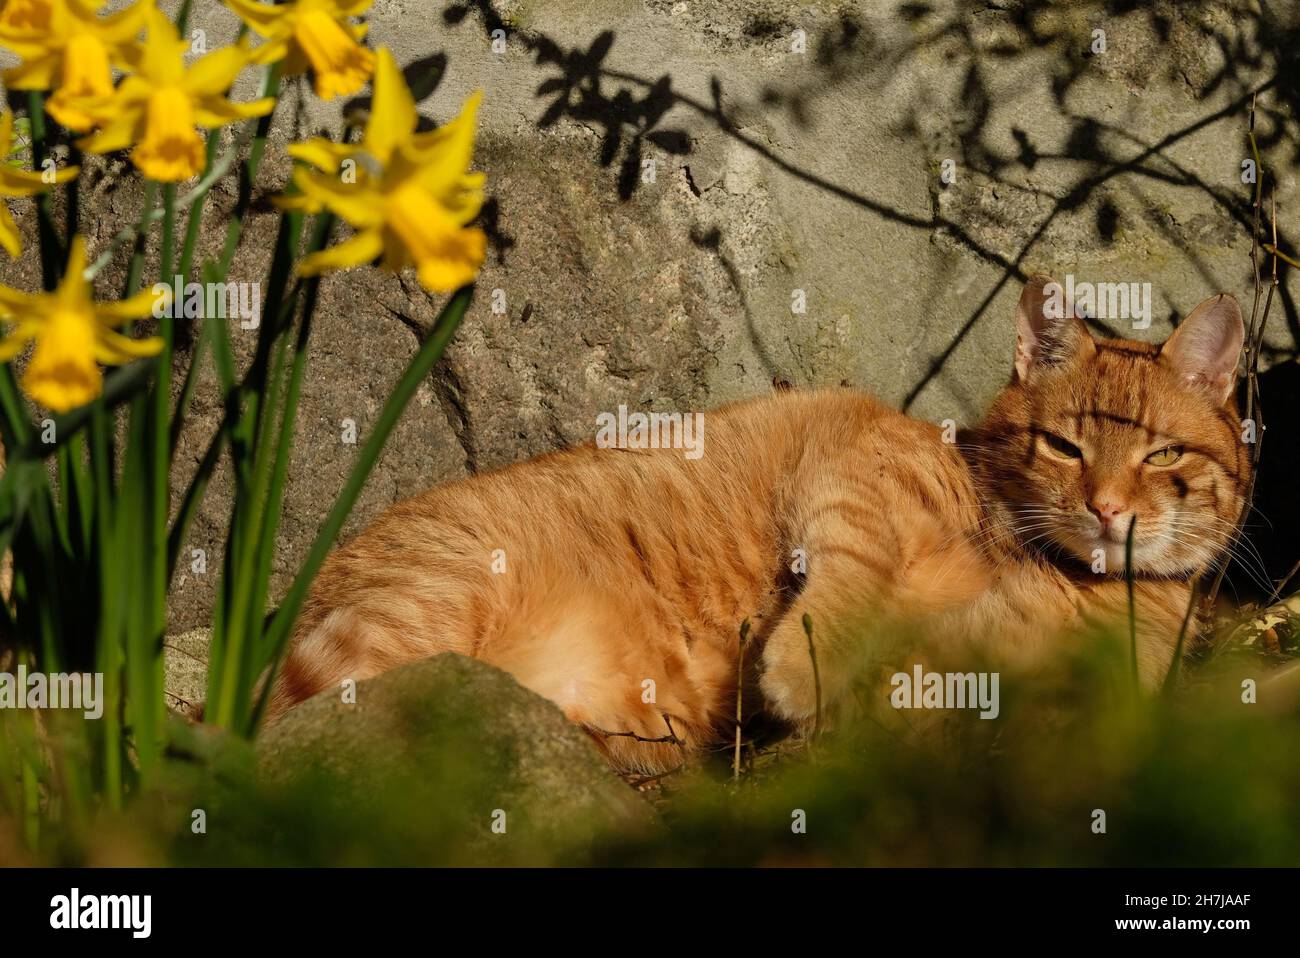 A colour photograph of a ginger cat sunning himself close to some daffodils. Stock Photo